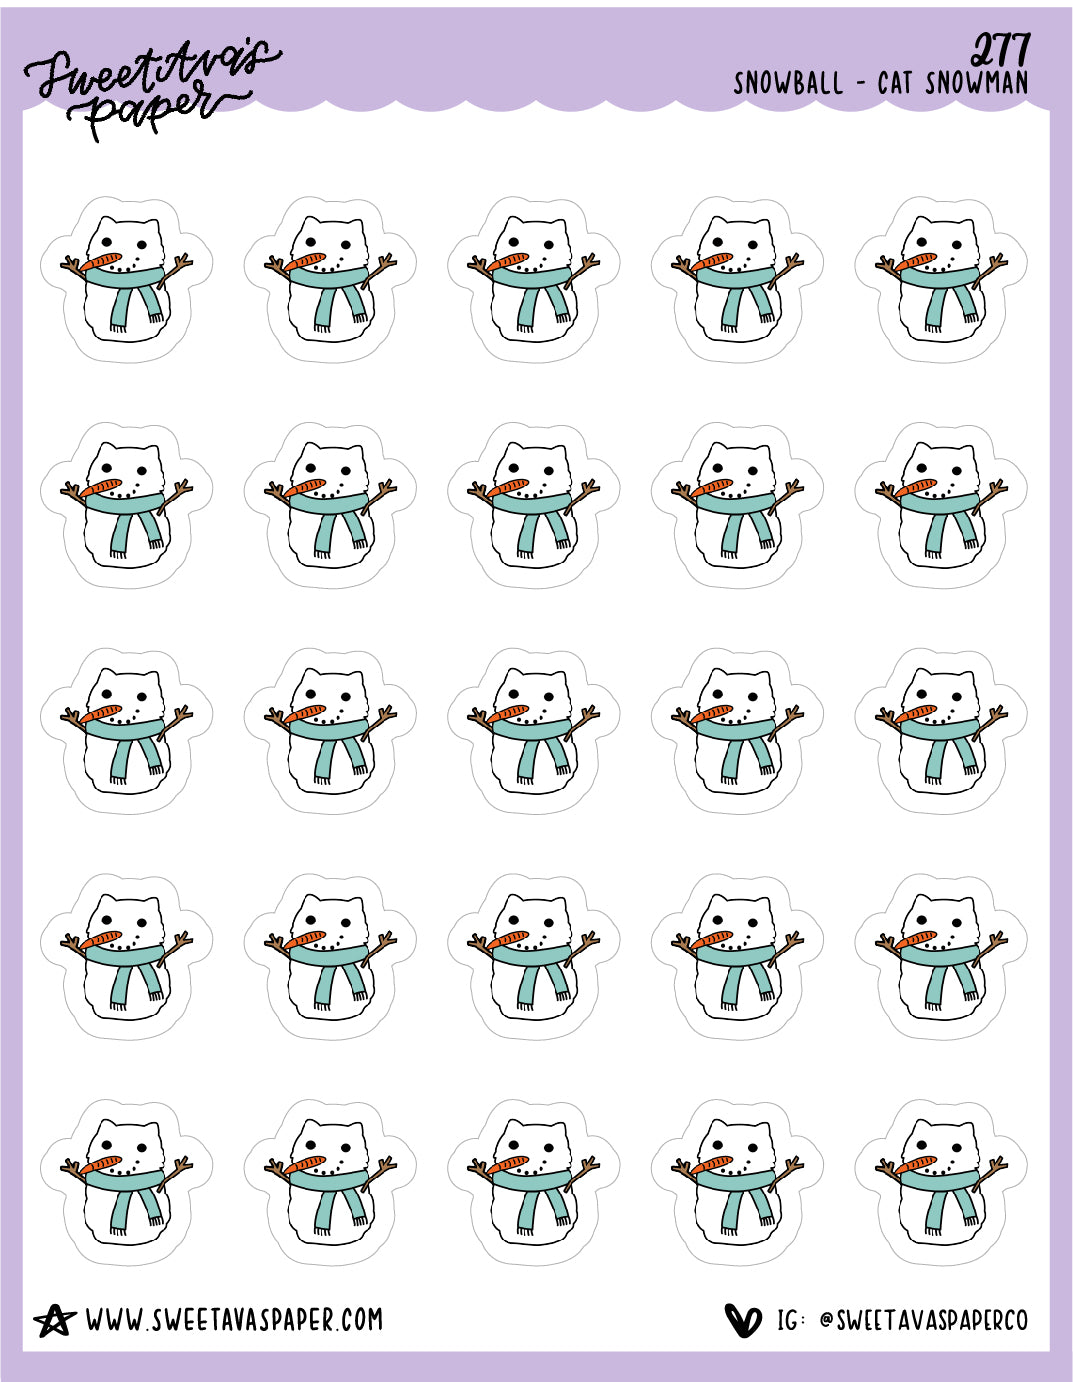 Snowman Kitty Stickers - Snowball The Cat - [277]